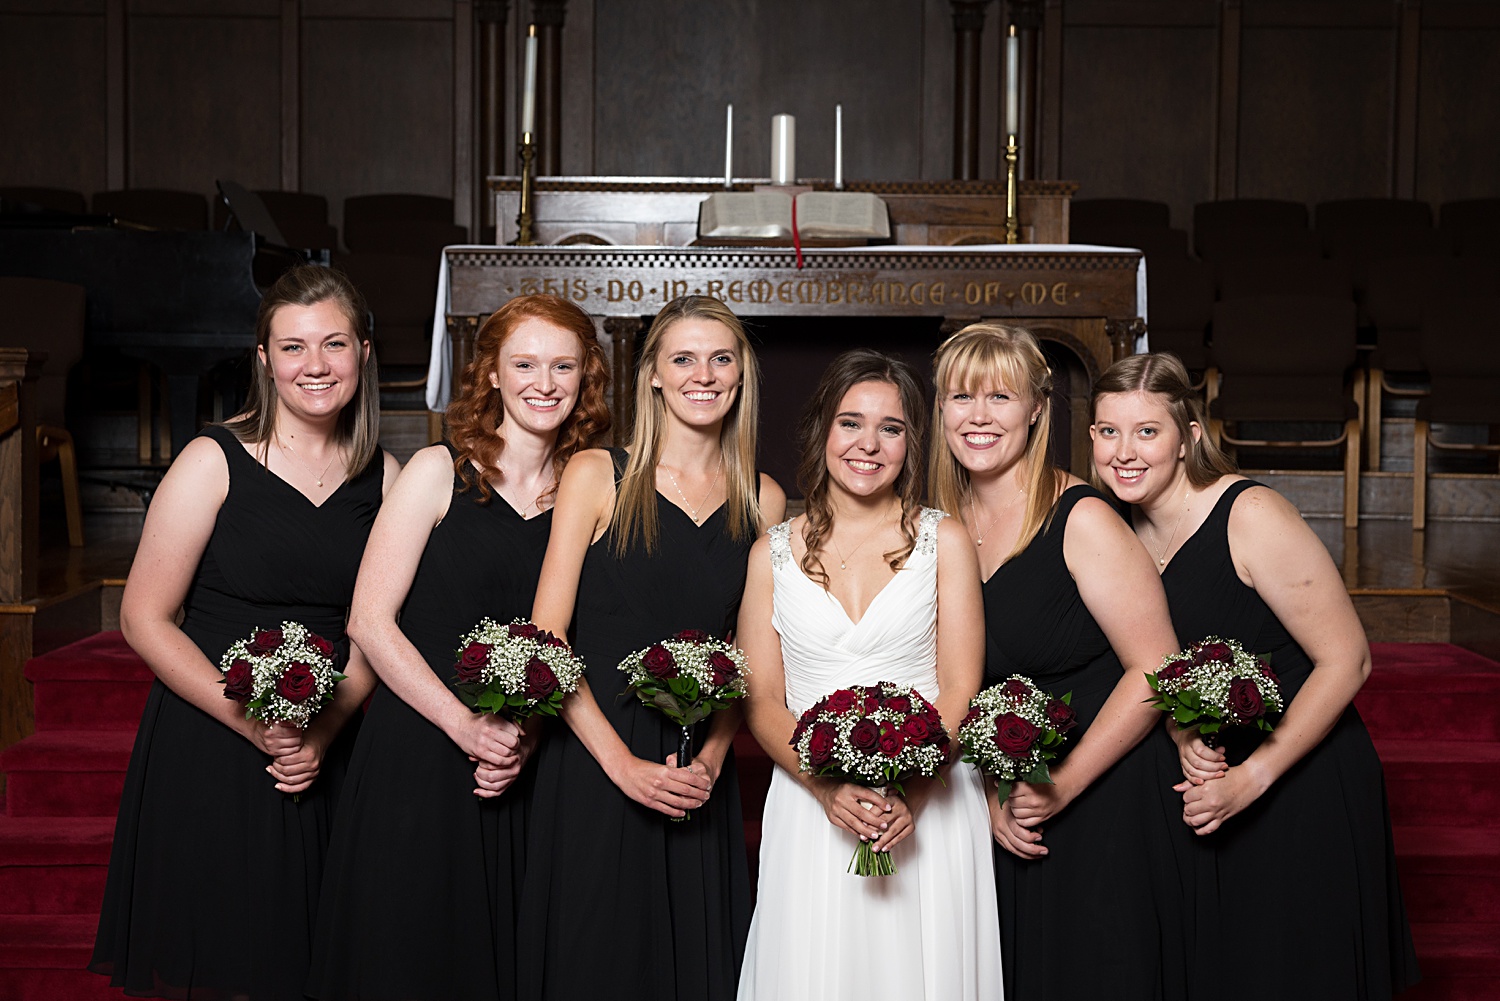 Wedding Party formal images at United Methodist Church in Lawrence, KS